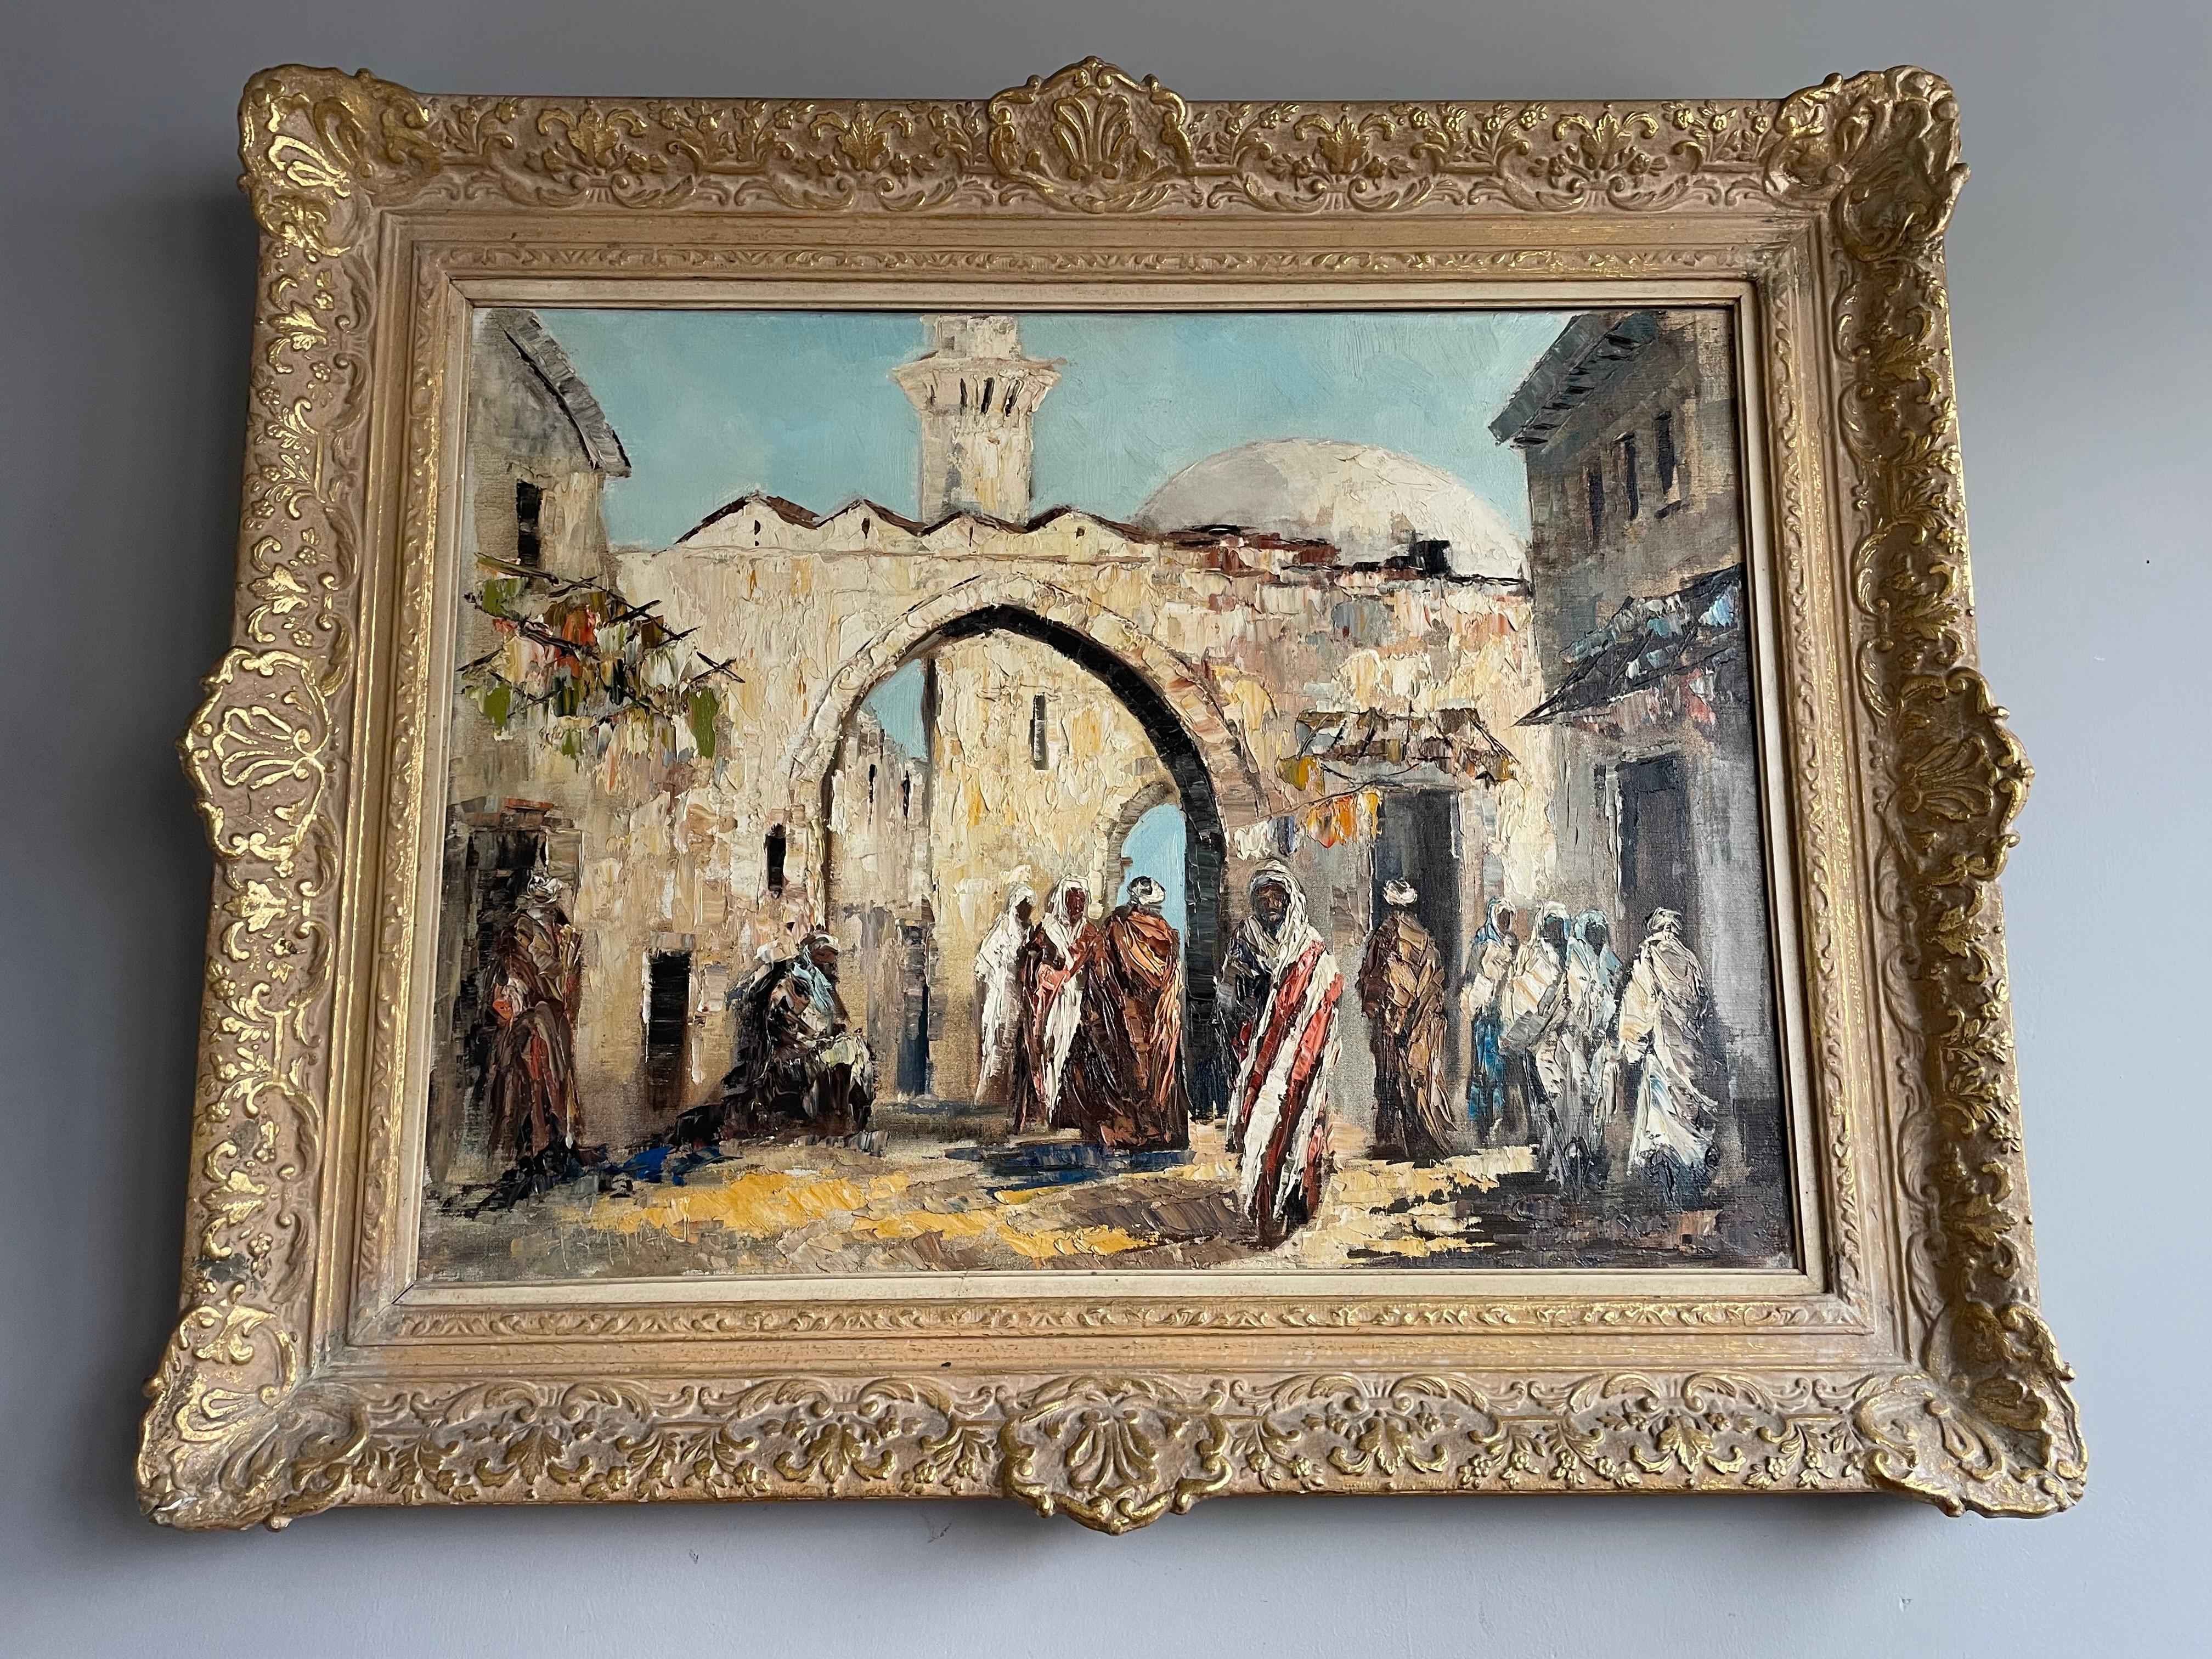 Islamic Large Hand Painted Oil on Canvas Painting of Arab Street Scene Signed Hassan For Sale